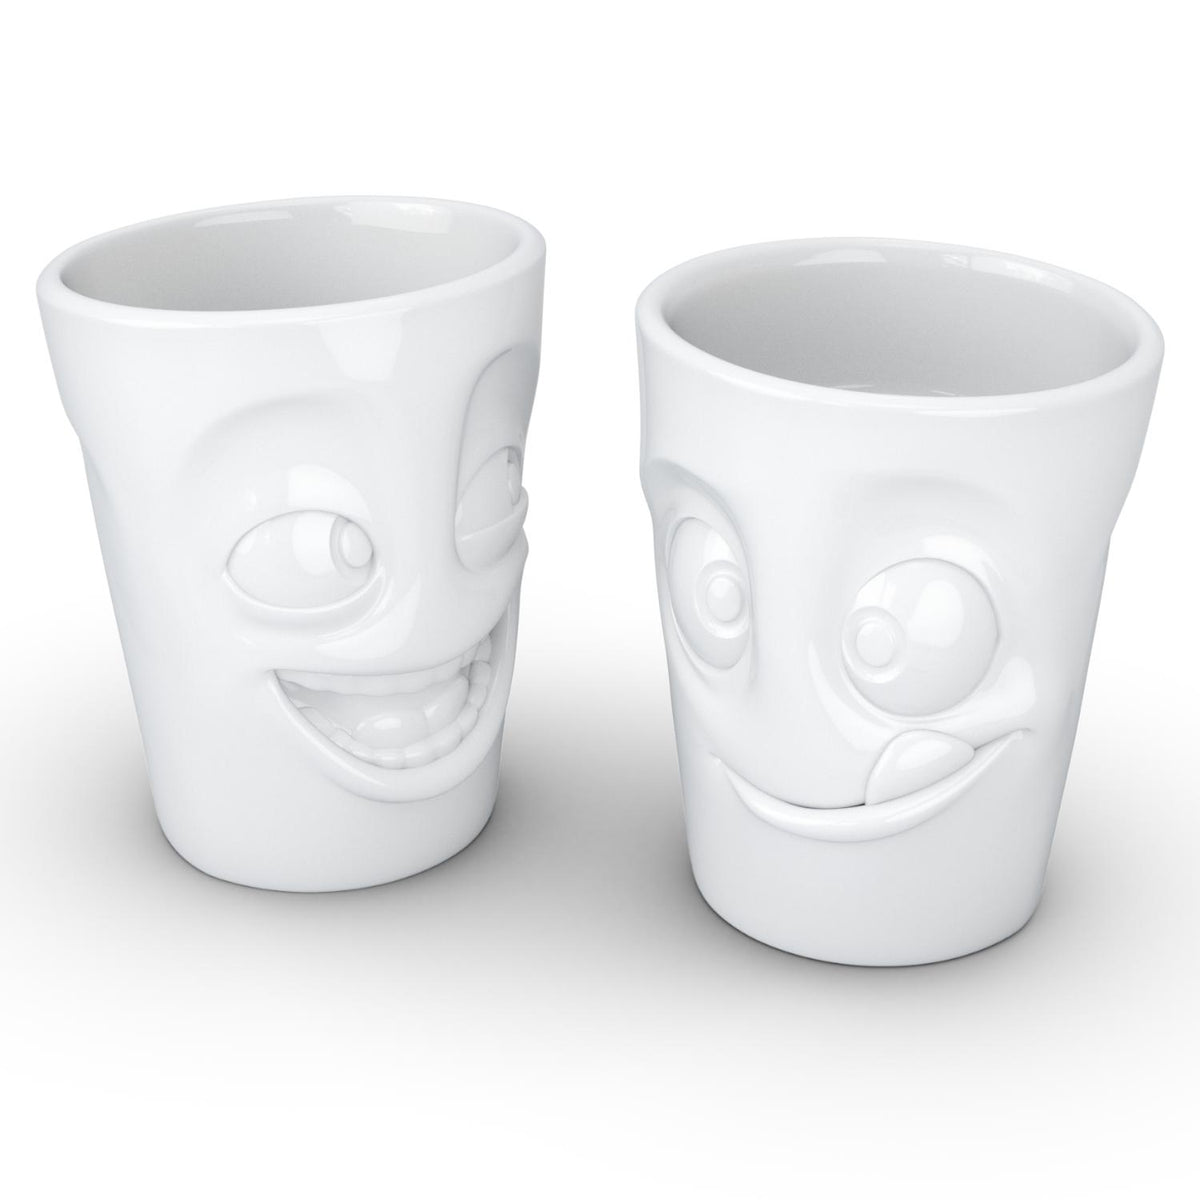 Coffee Mug with Handle, Joking Face – FIFTYEIGHT Products